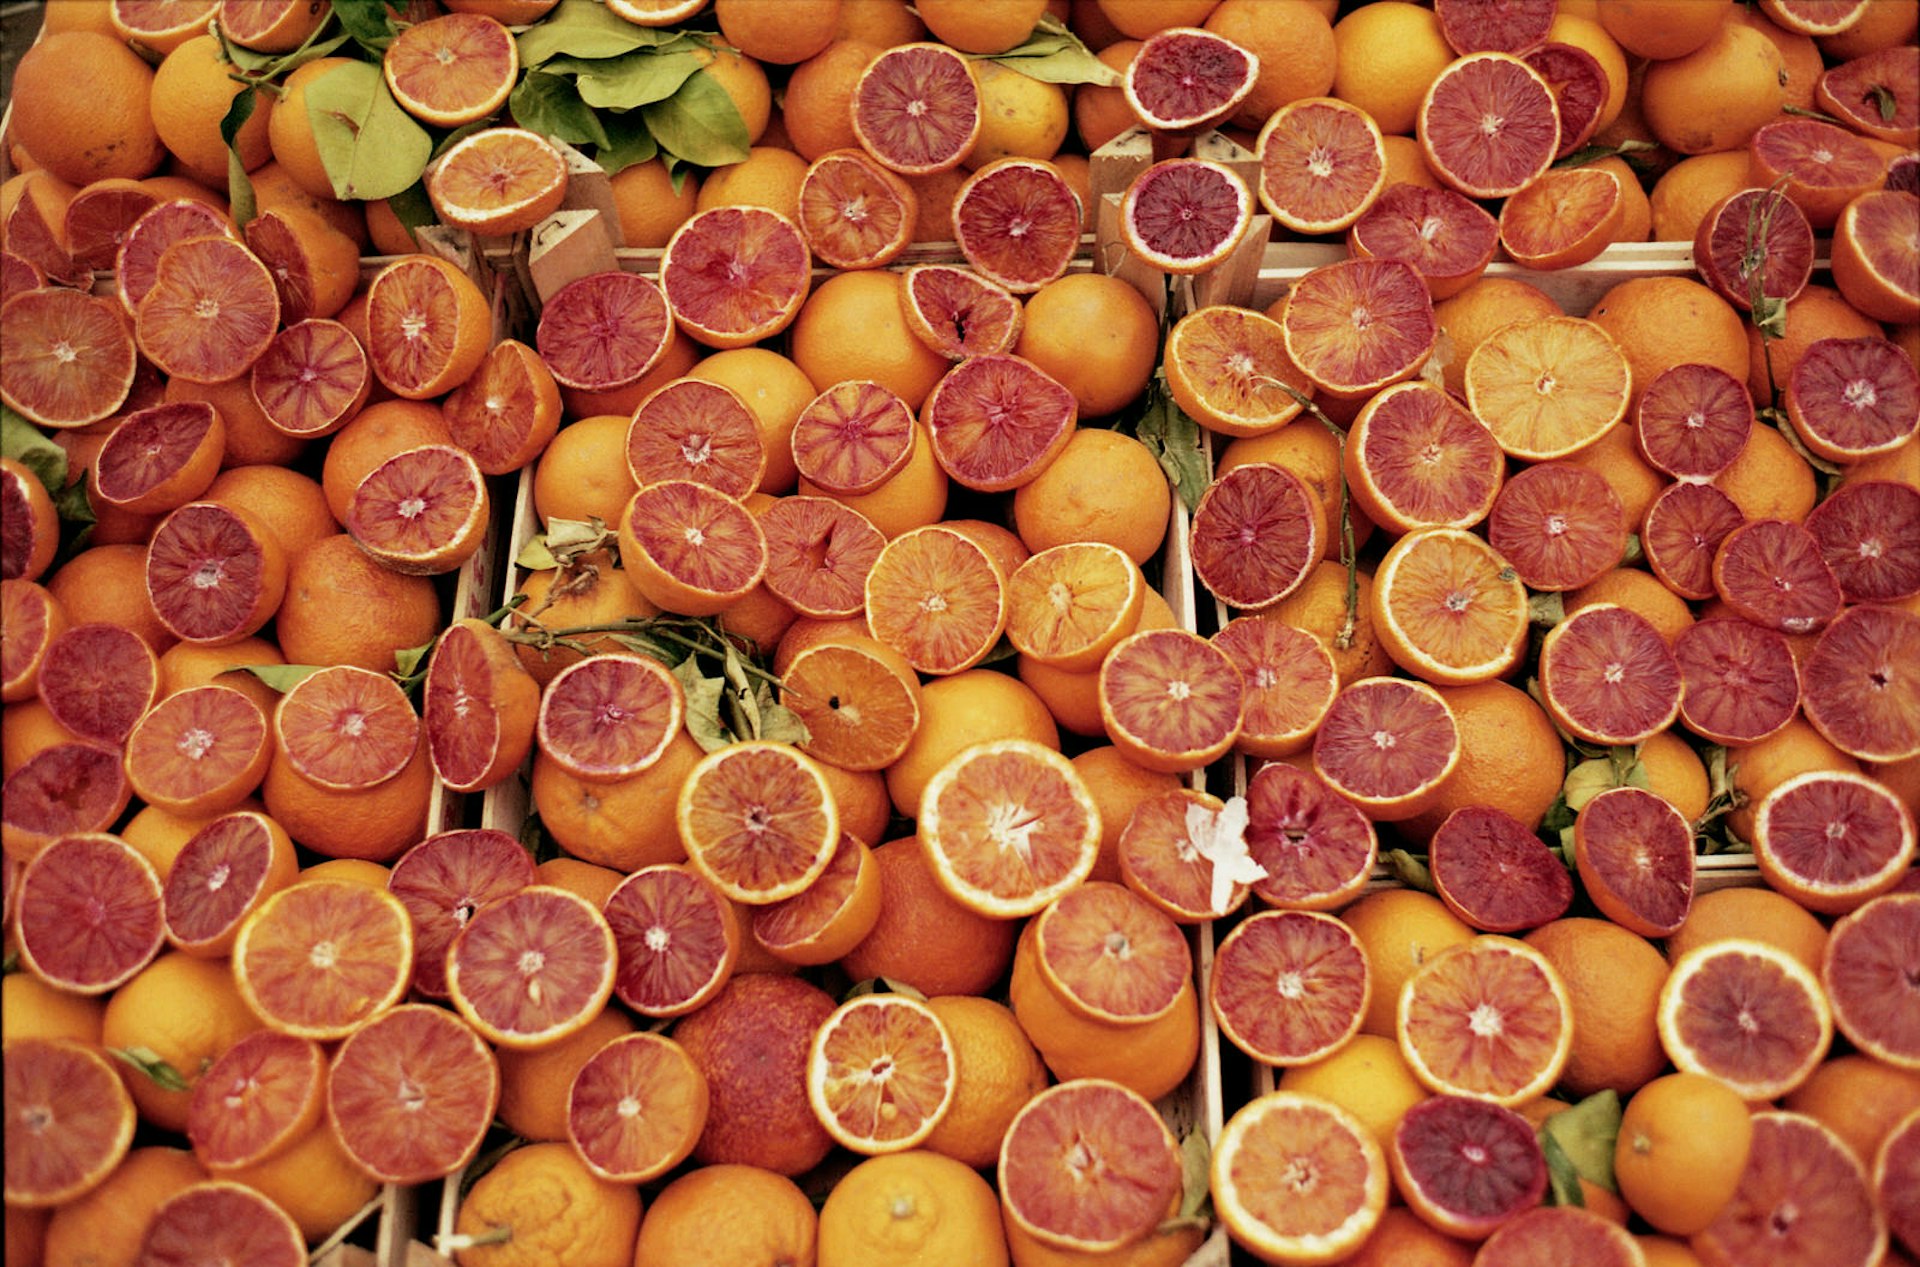 Close up of blood oranges at a market in Sicily.